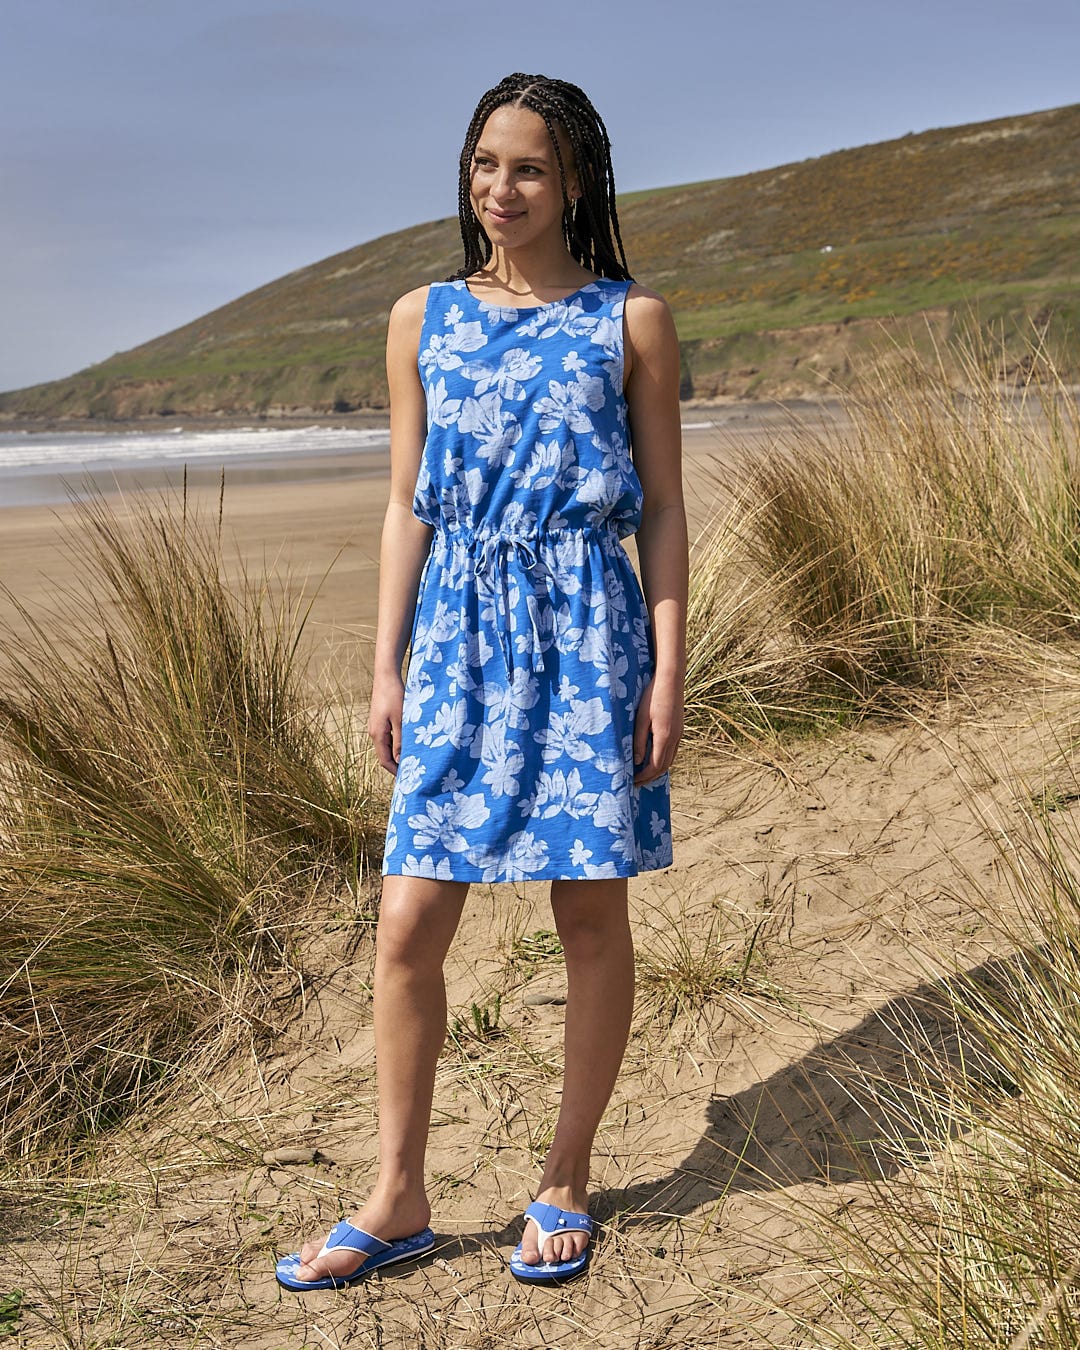 A woman in a Saltrock Floral - Womens Tie Vest Dress - Blue standing on the beach.